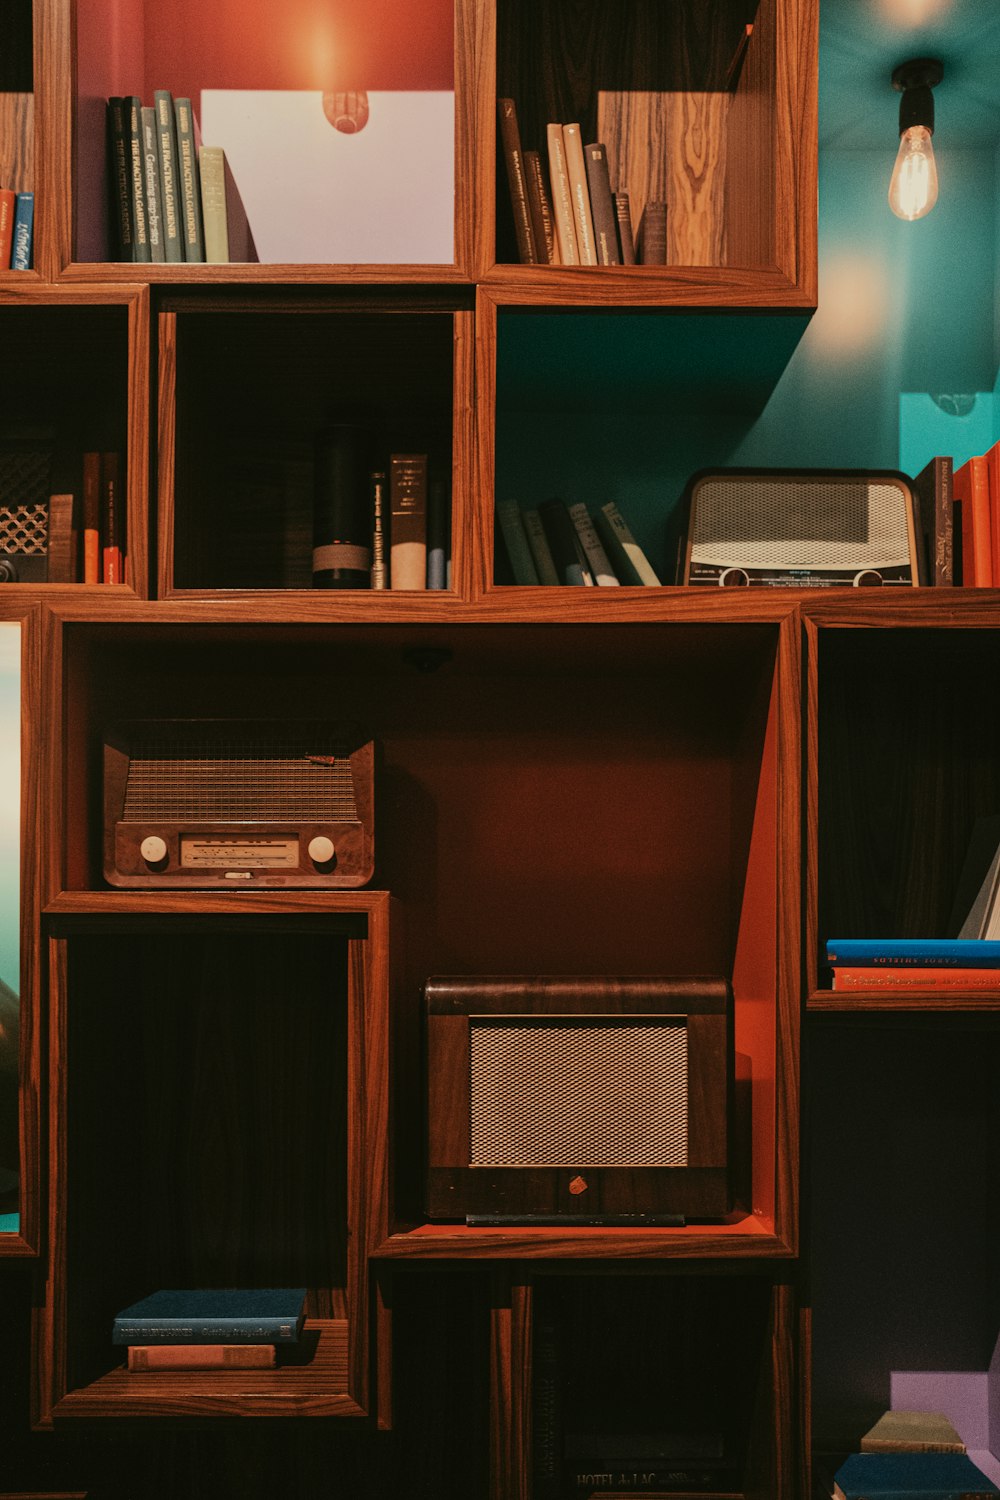 a wooden shelf with a radio and books on it